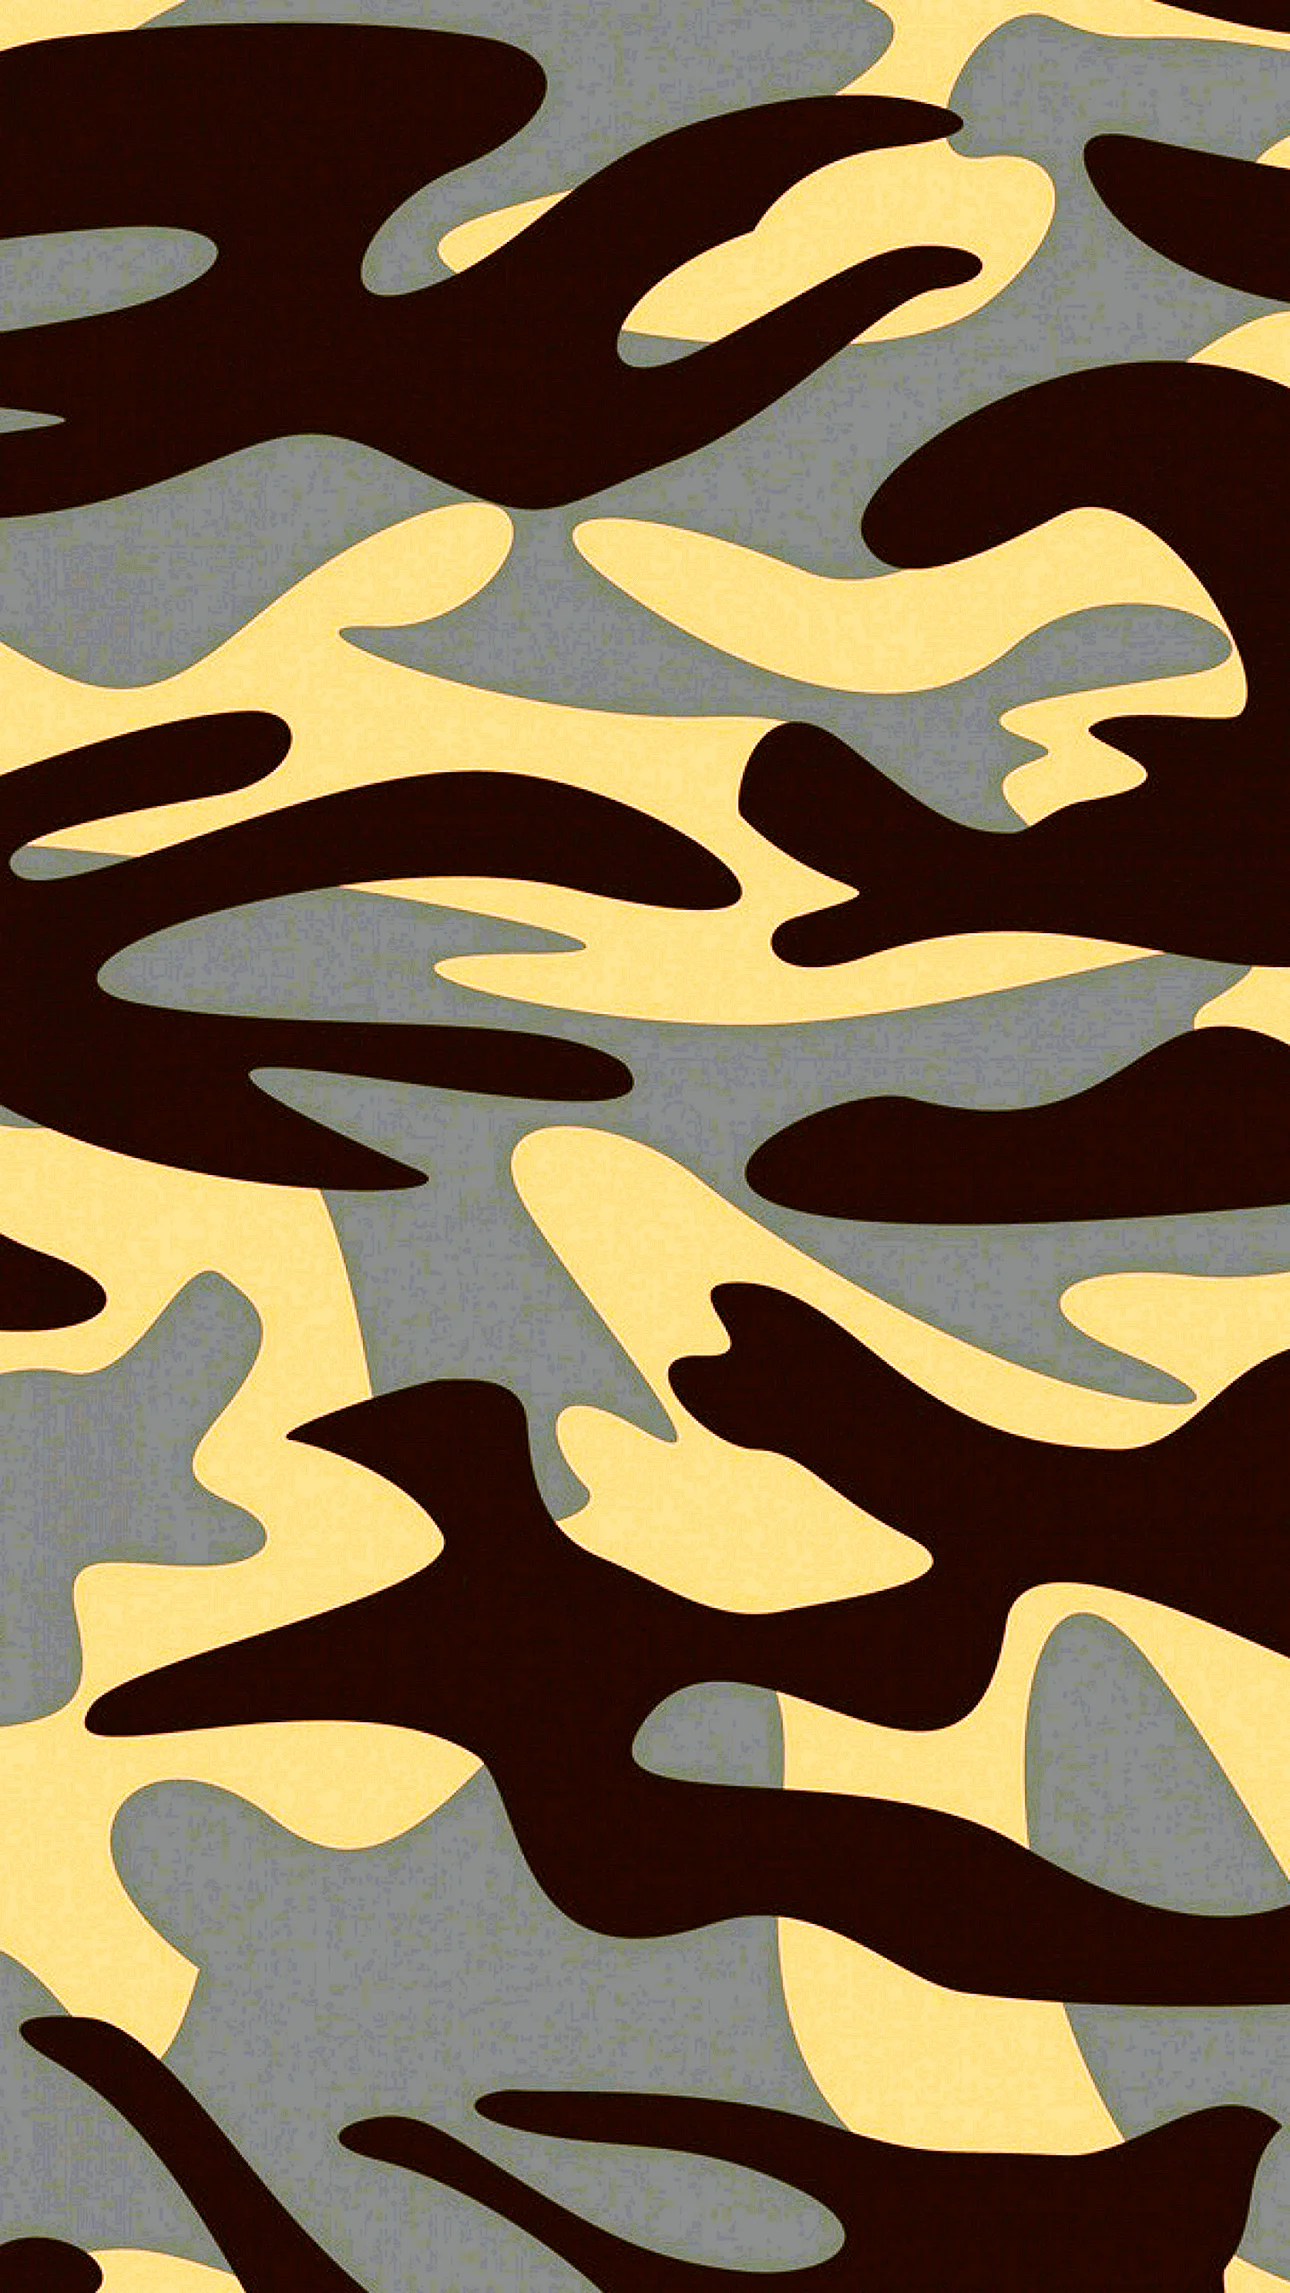 Military Camouflage Wallpaper For iPhone